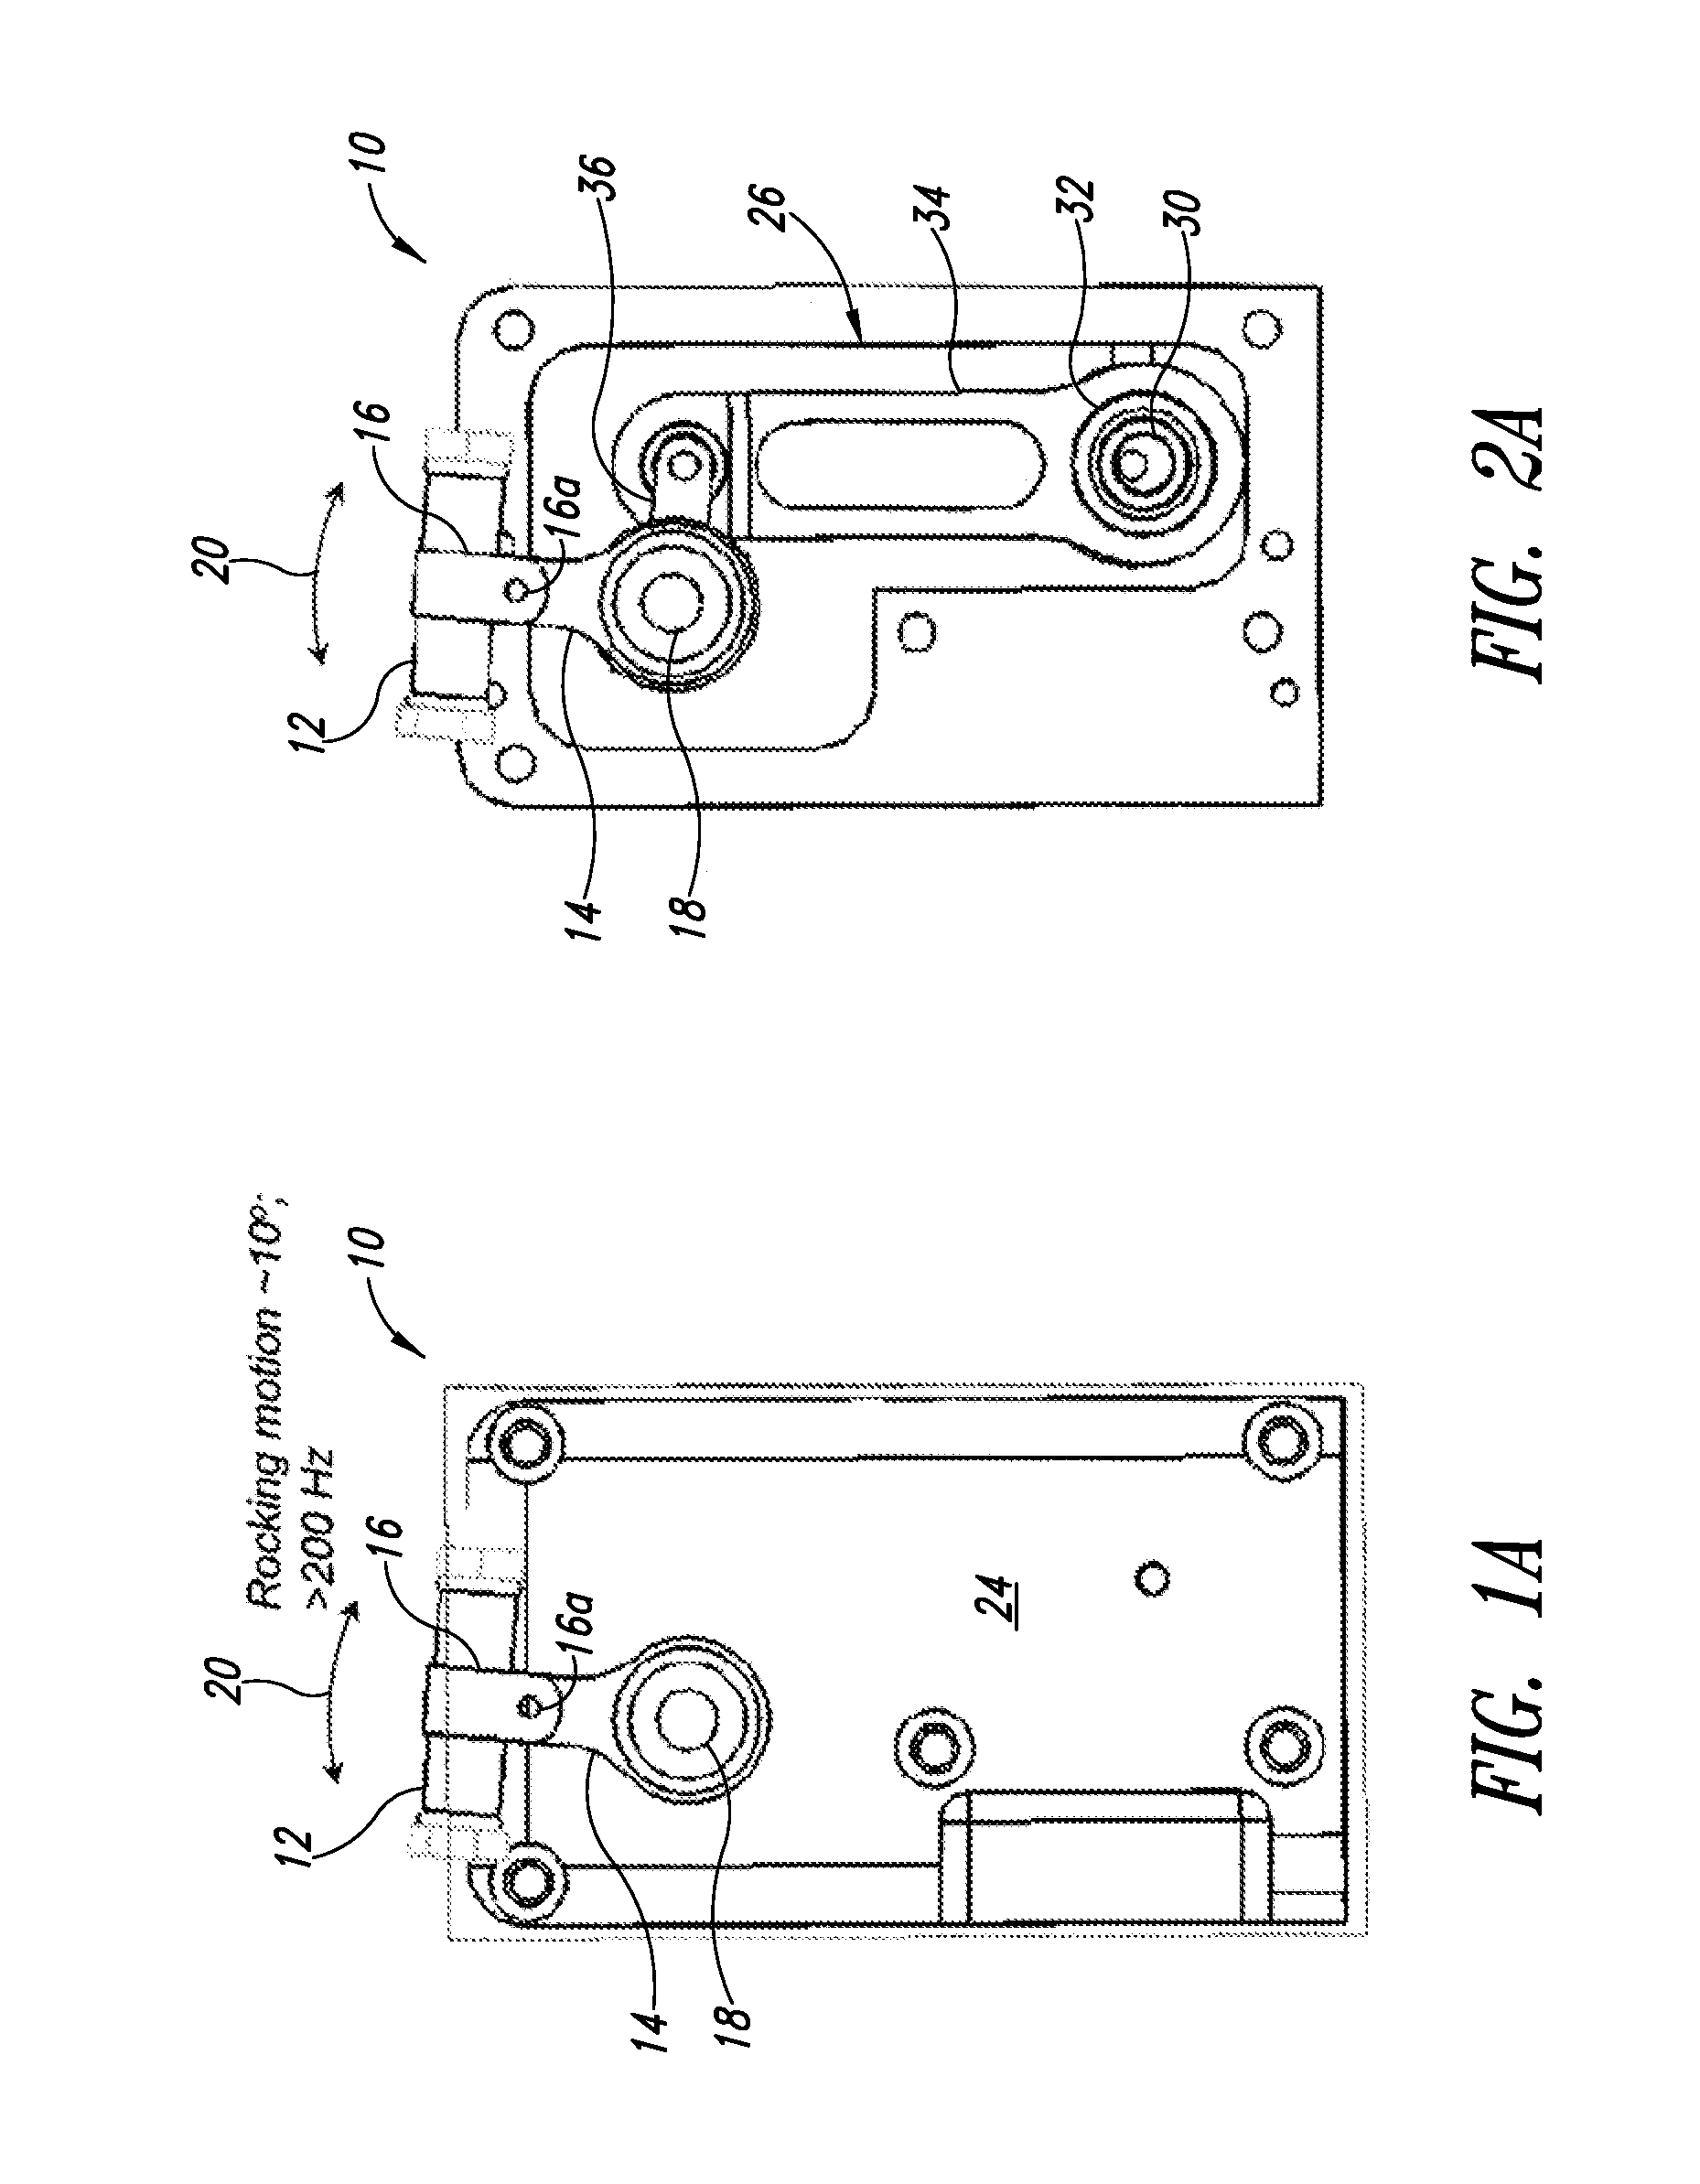 System, apparatus and method for material preparation and/or handling